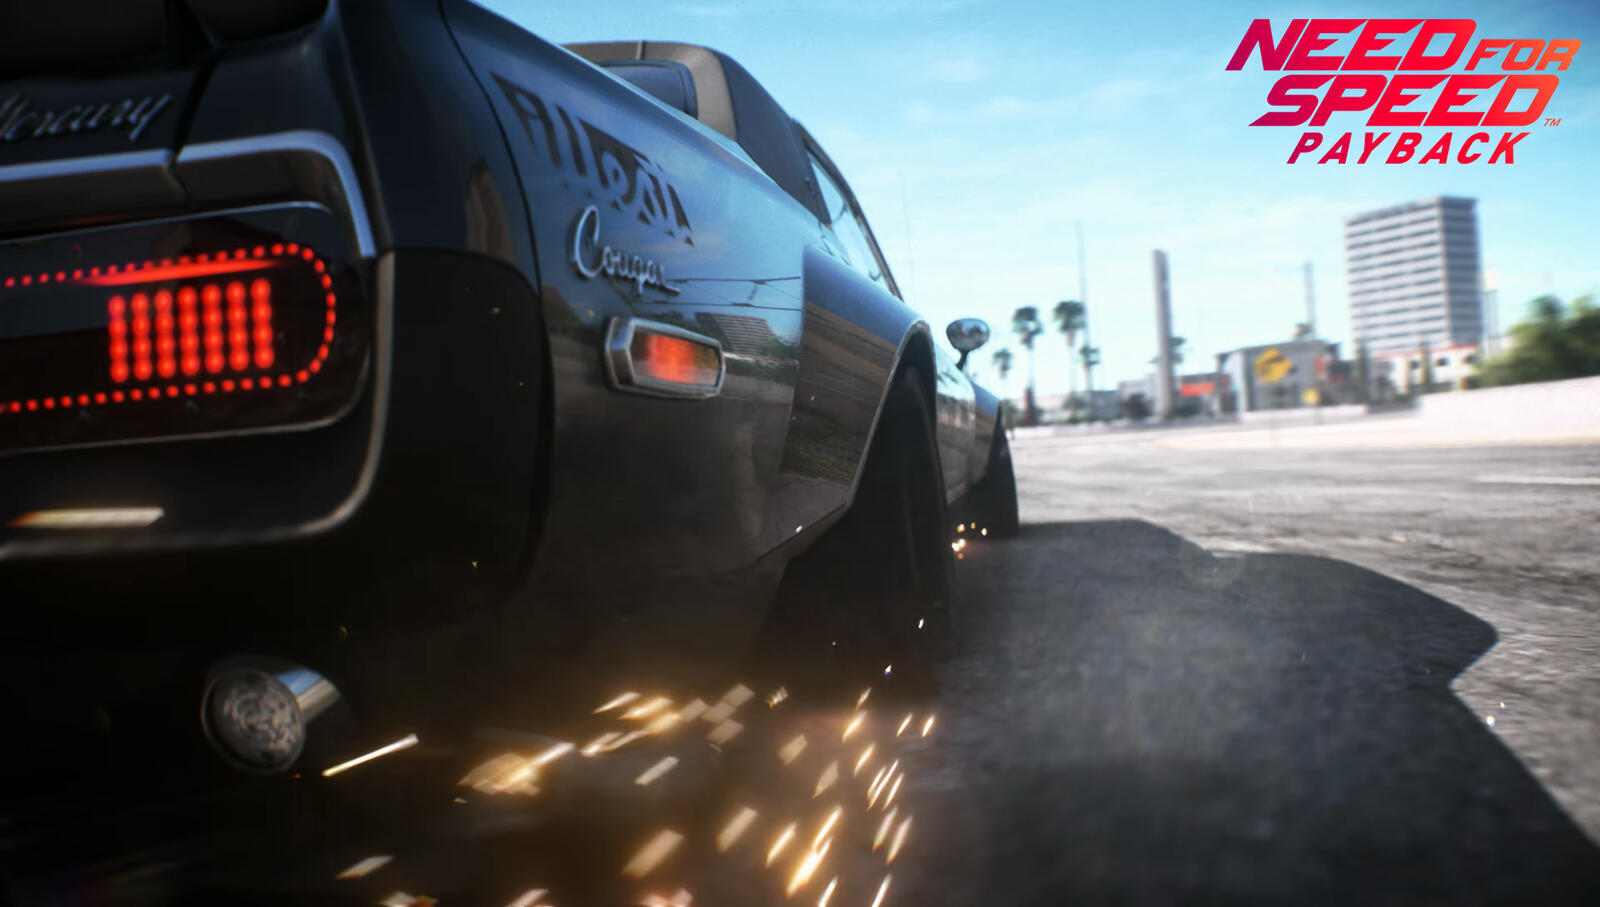 Wallpapers Need for Speed need for speed payback cars on the desktop